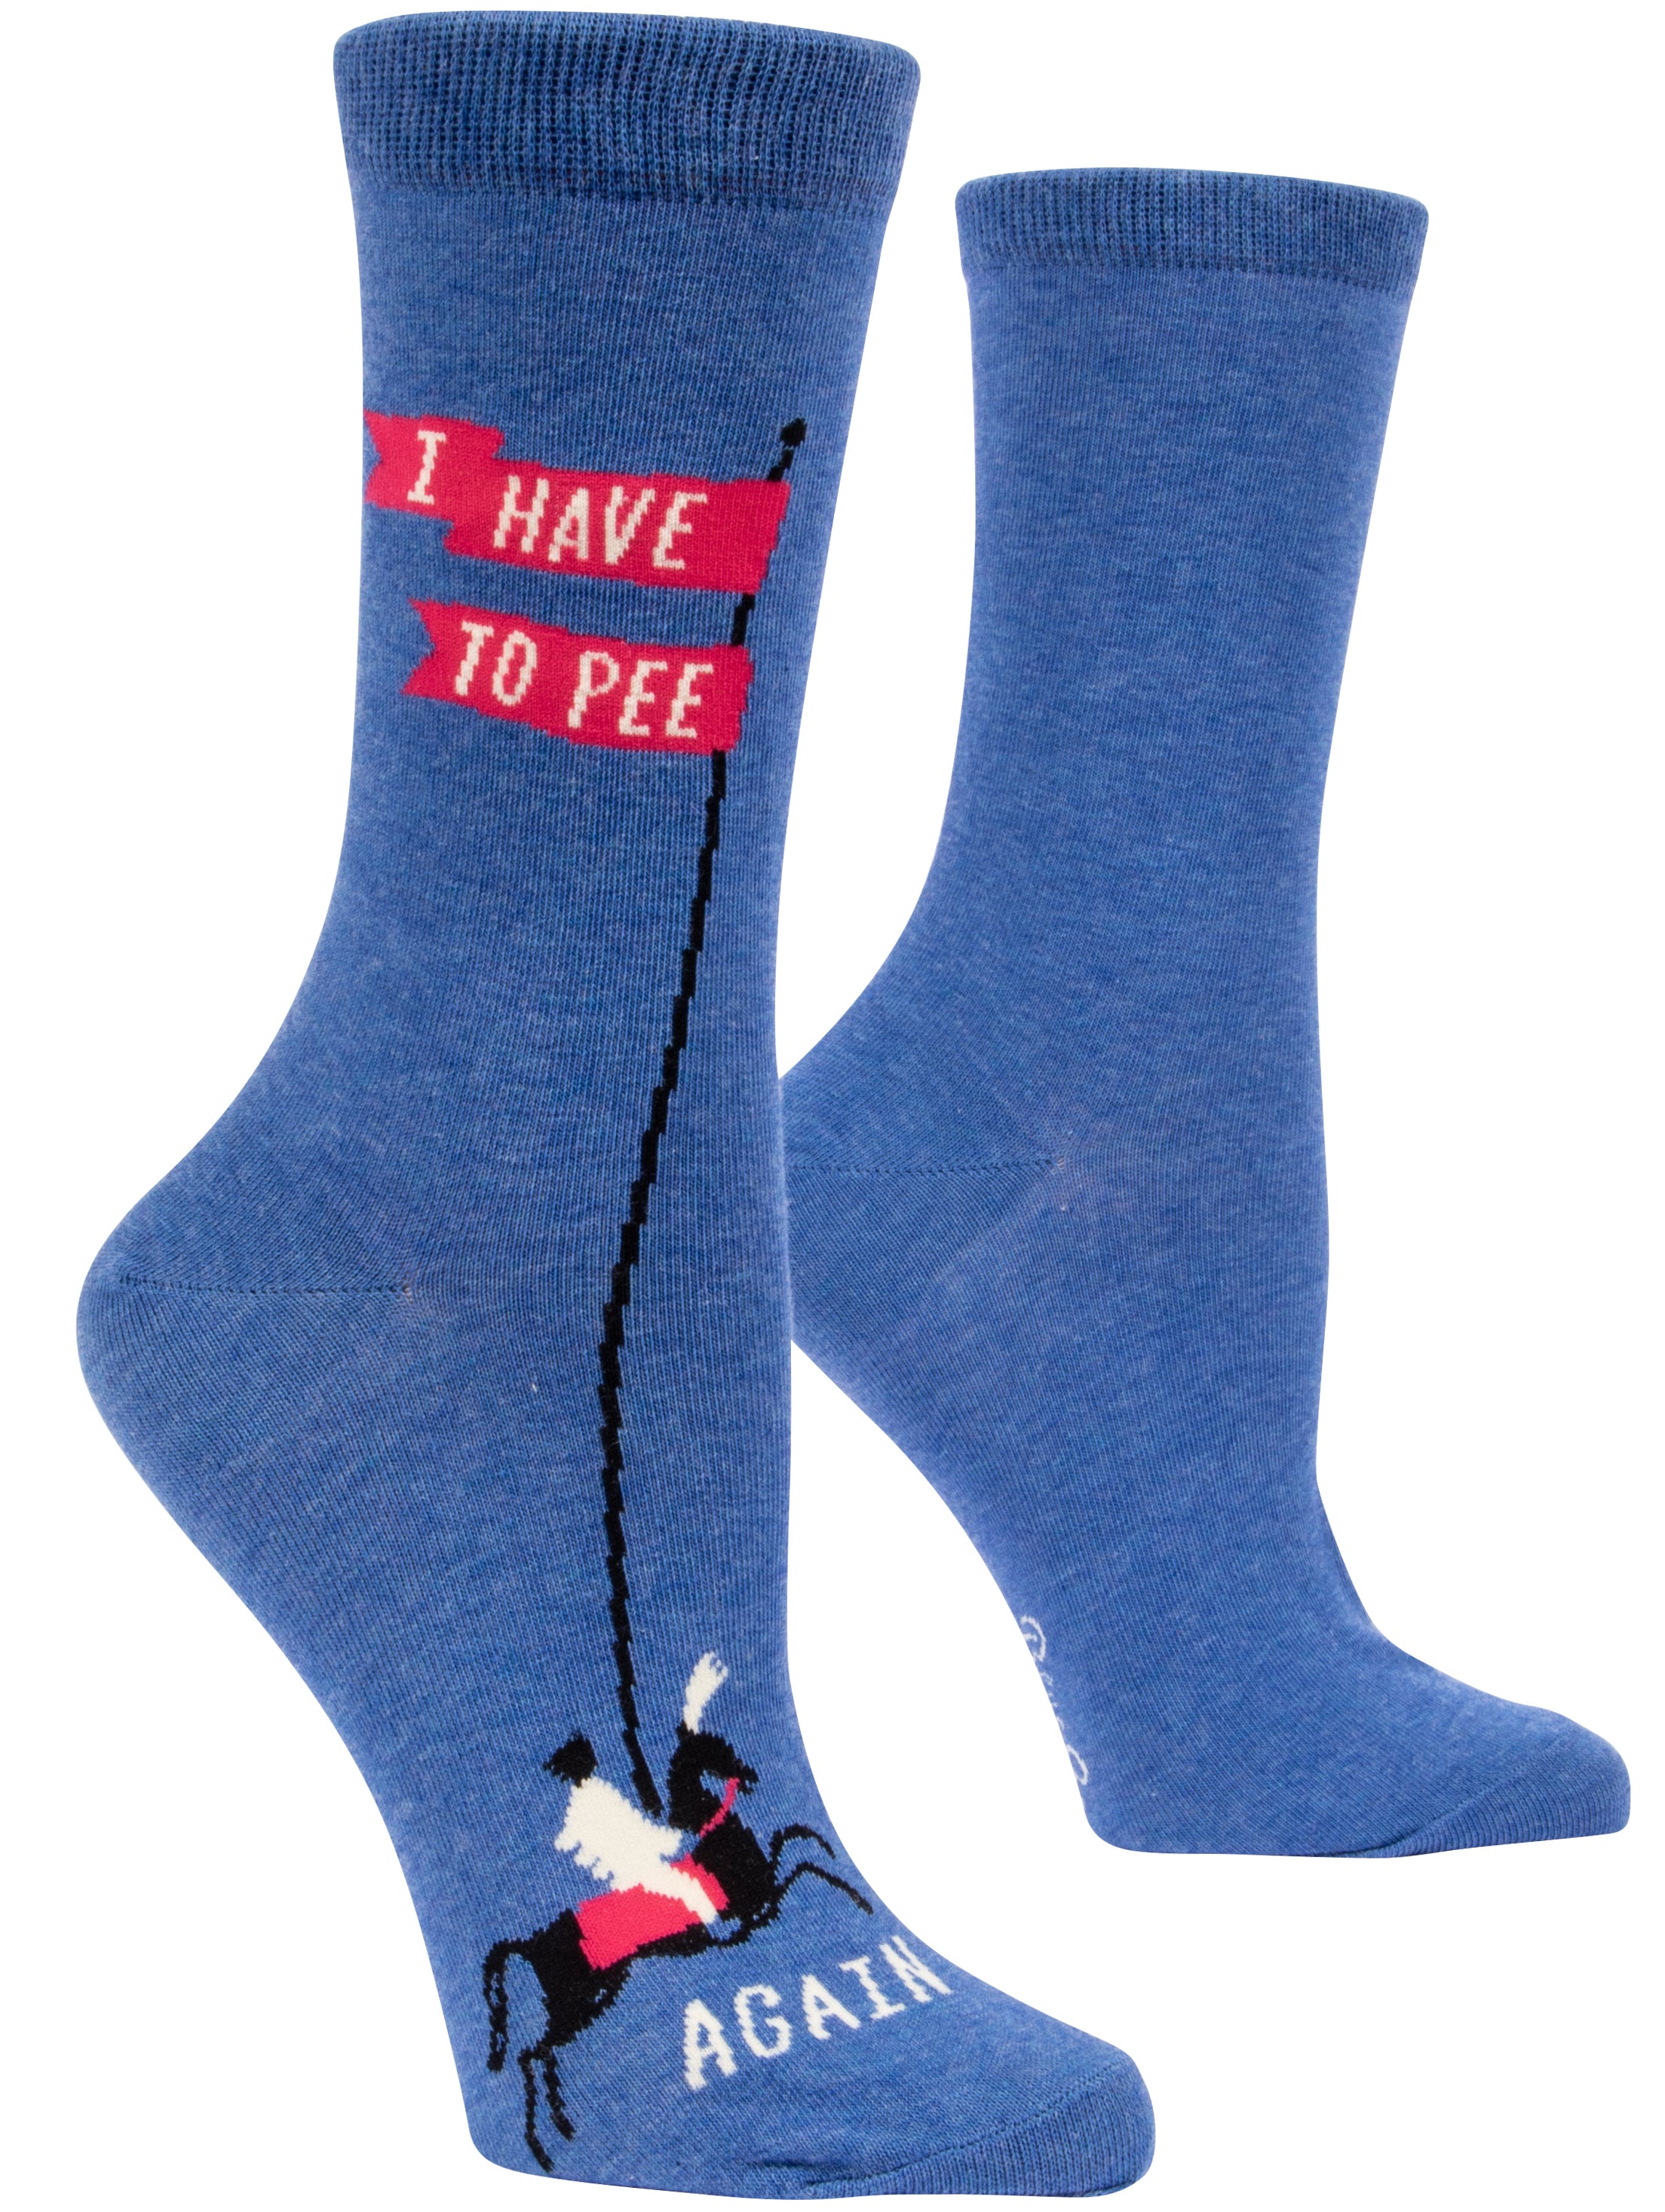 blue socks with a cartoon horse rider on toe holding tall flags on poll that say i have to pee again